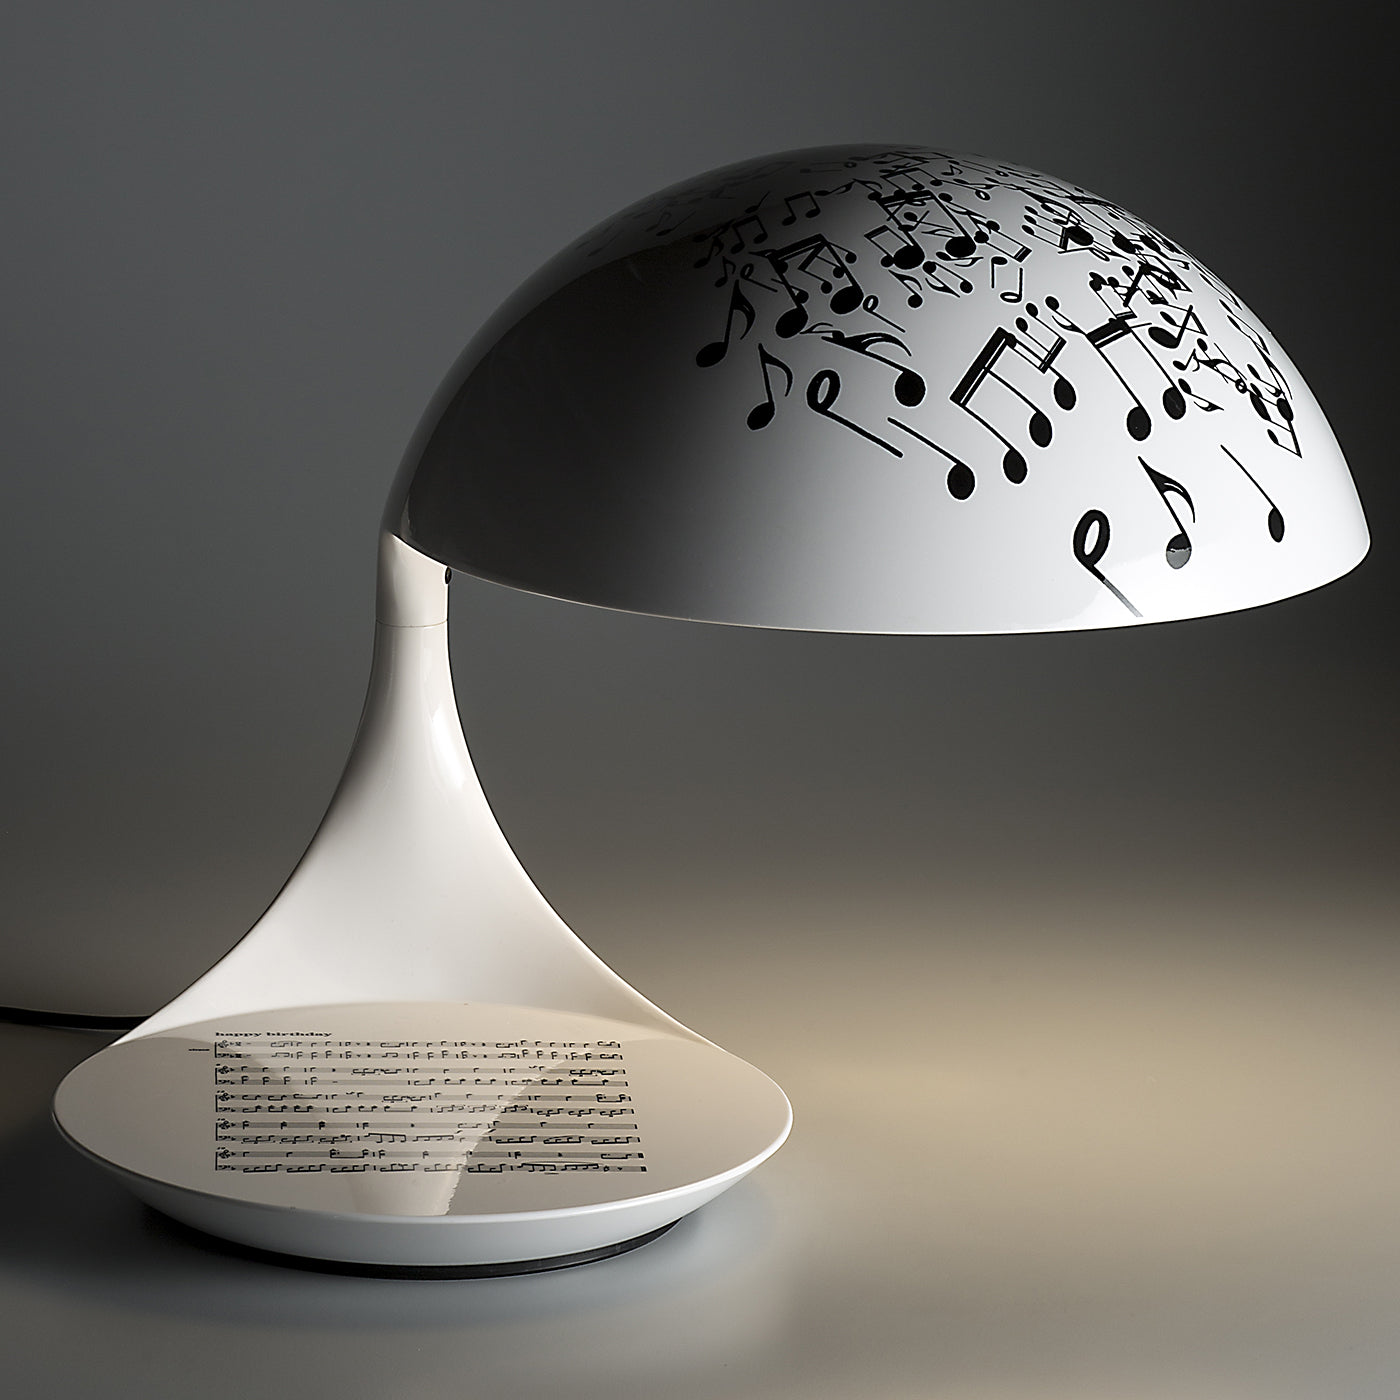 Cobra Texture Music Notes Table Lamp by Marco Ghilarducci - Alternative view 1